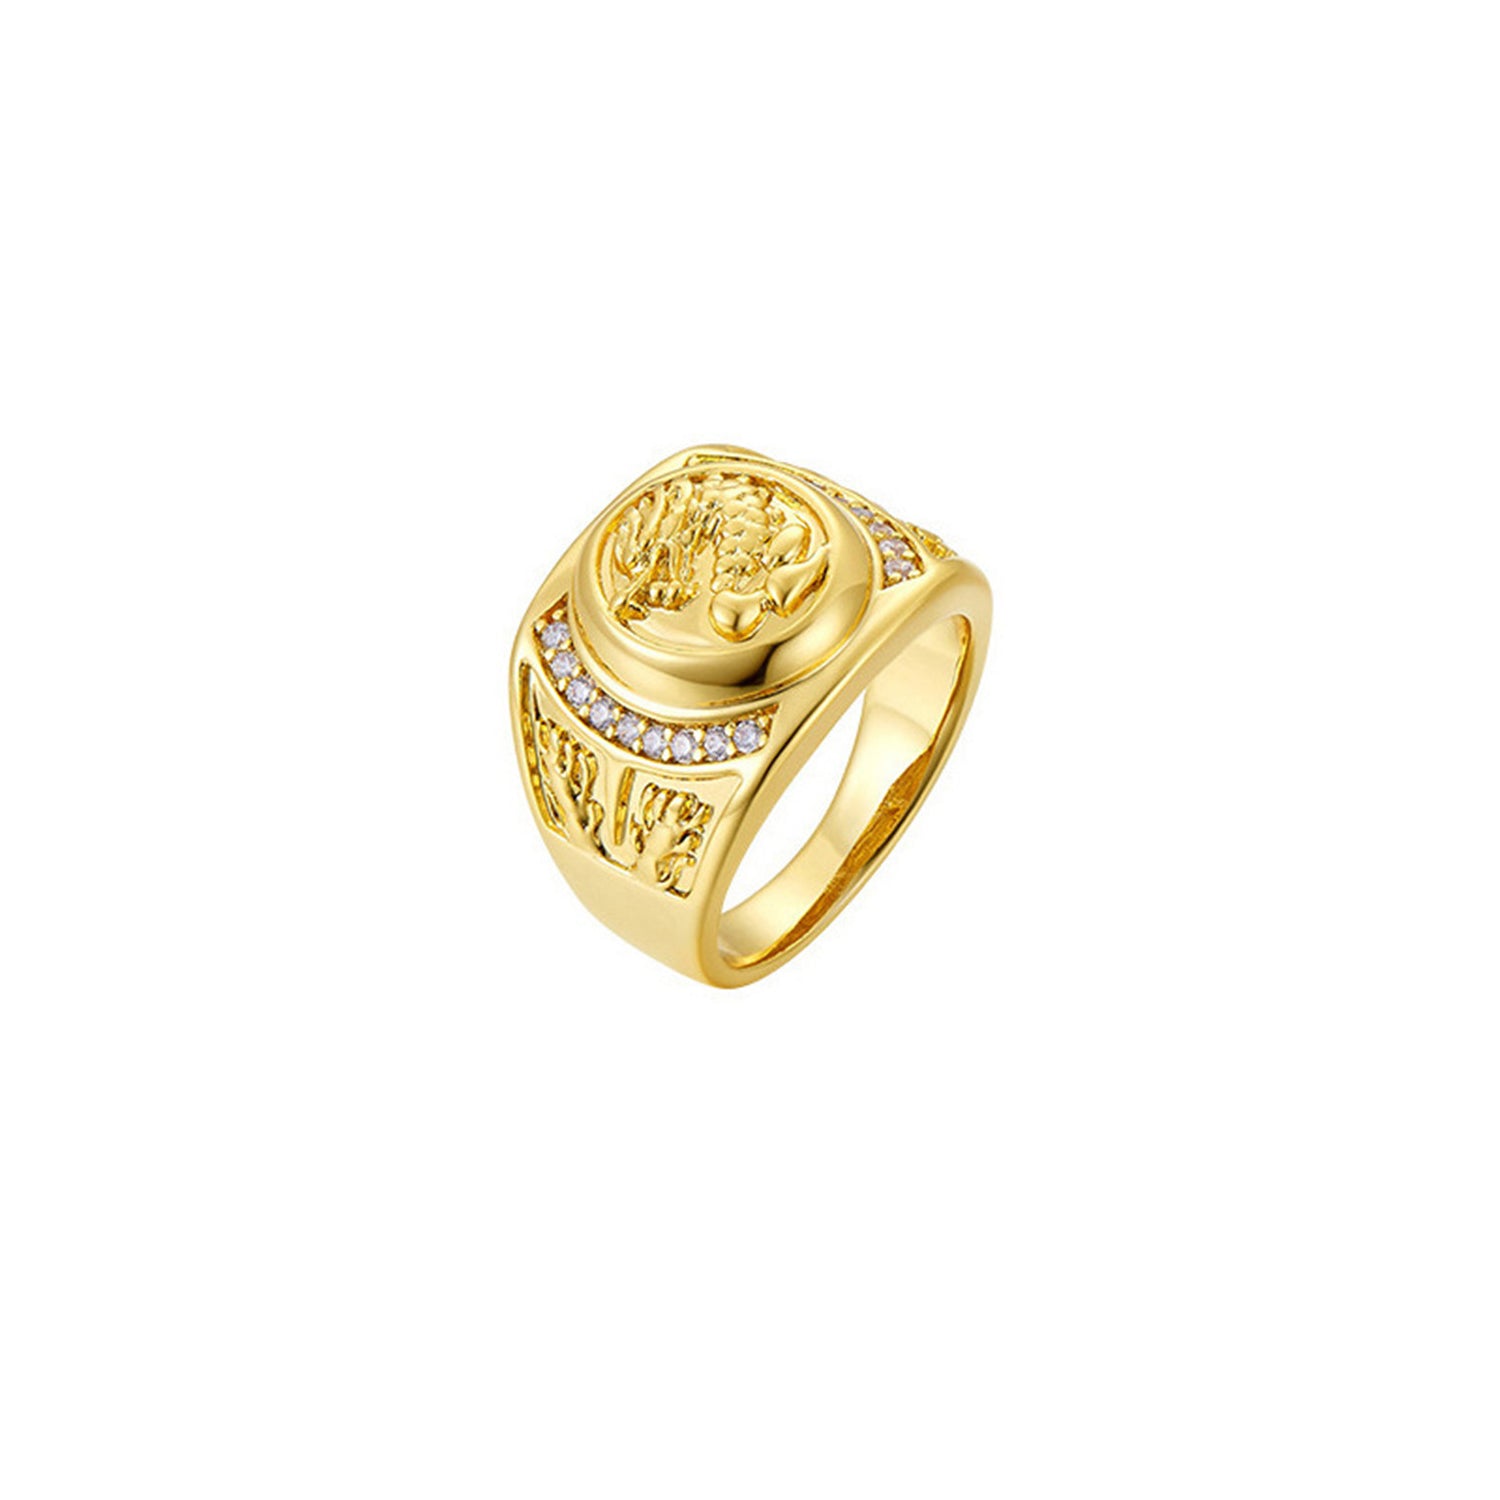 24K Gold Plated Men's Ring,Fashion And Liberal Feeling,Wide Surface Restore Ancient Ways